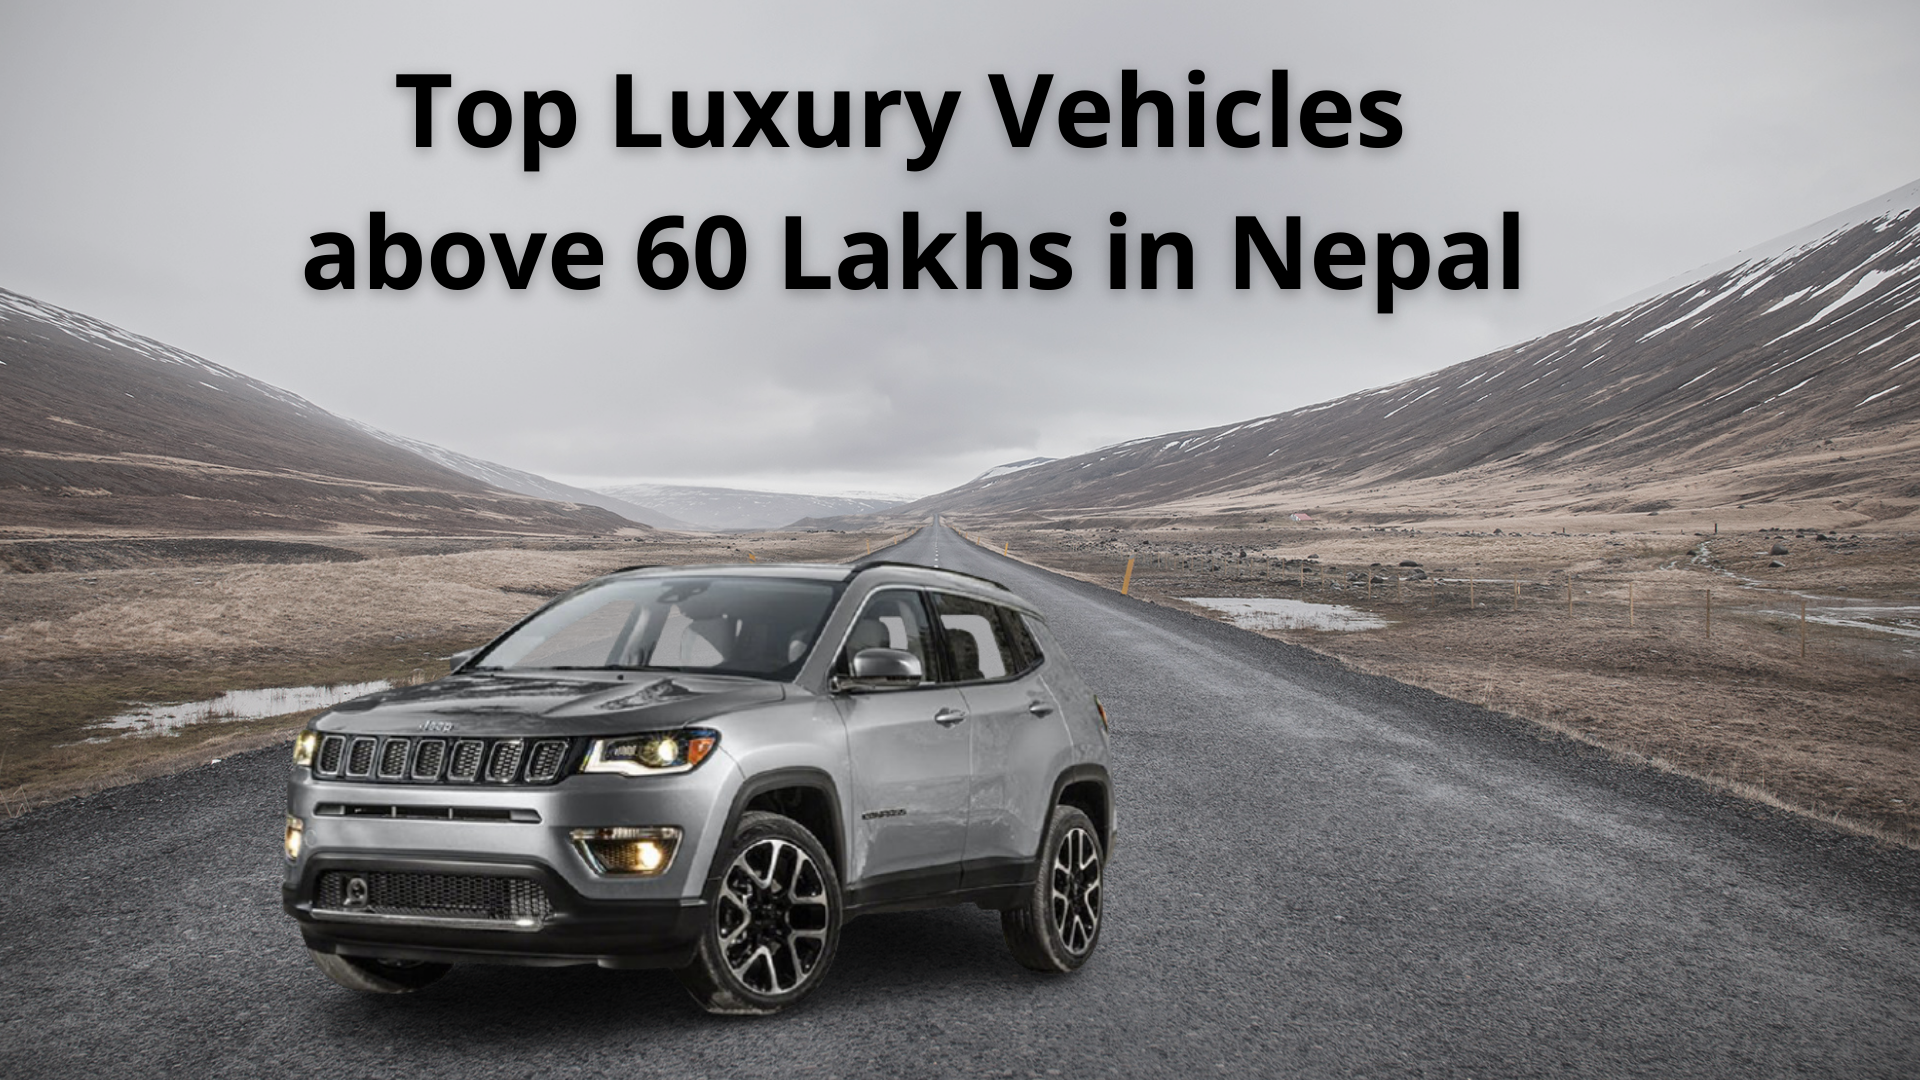 Top luxury vehicles above 60 lakhs in Nepal